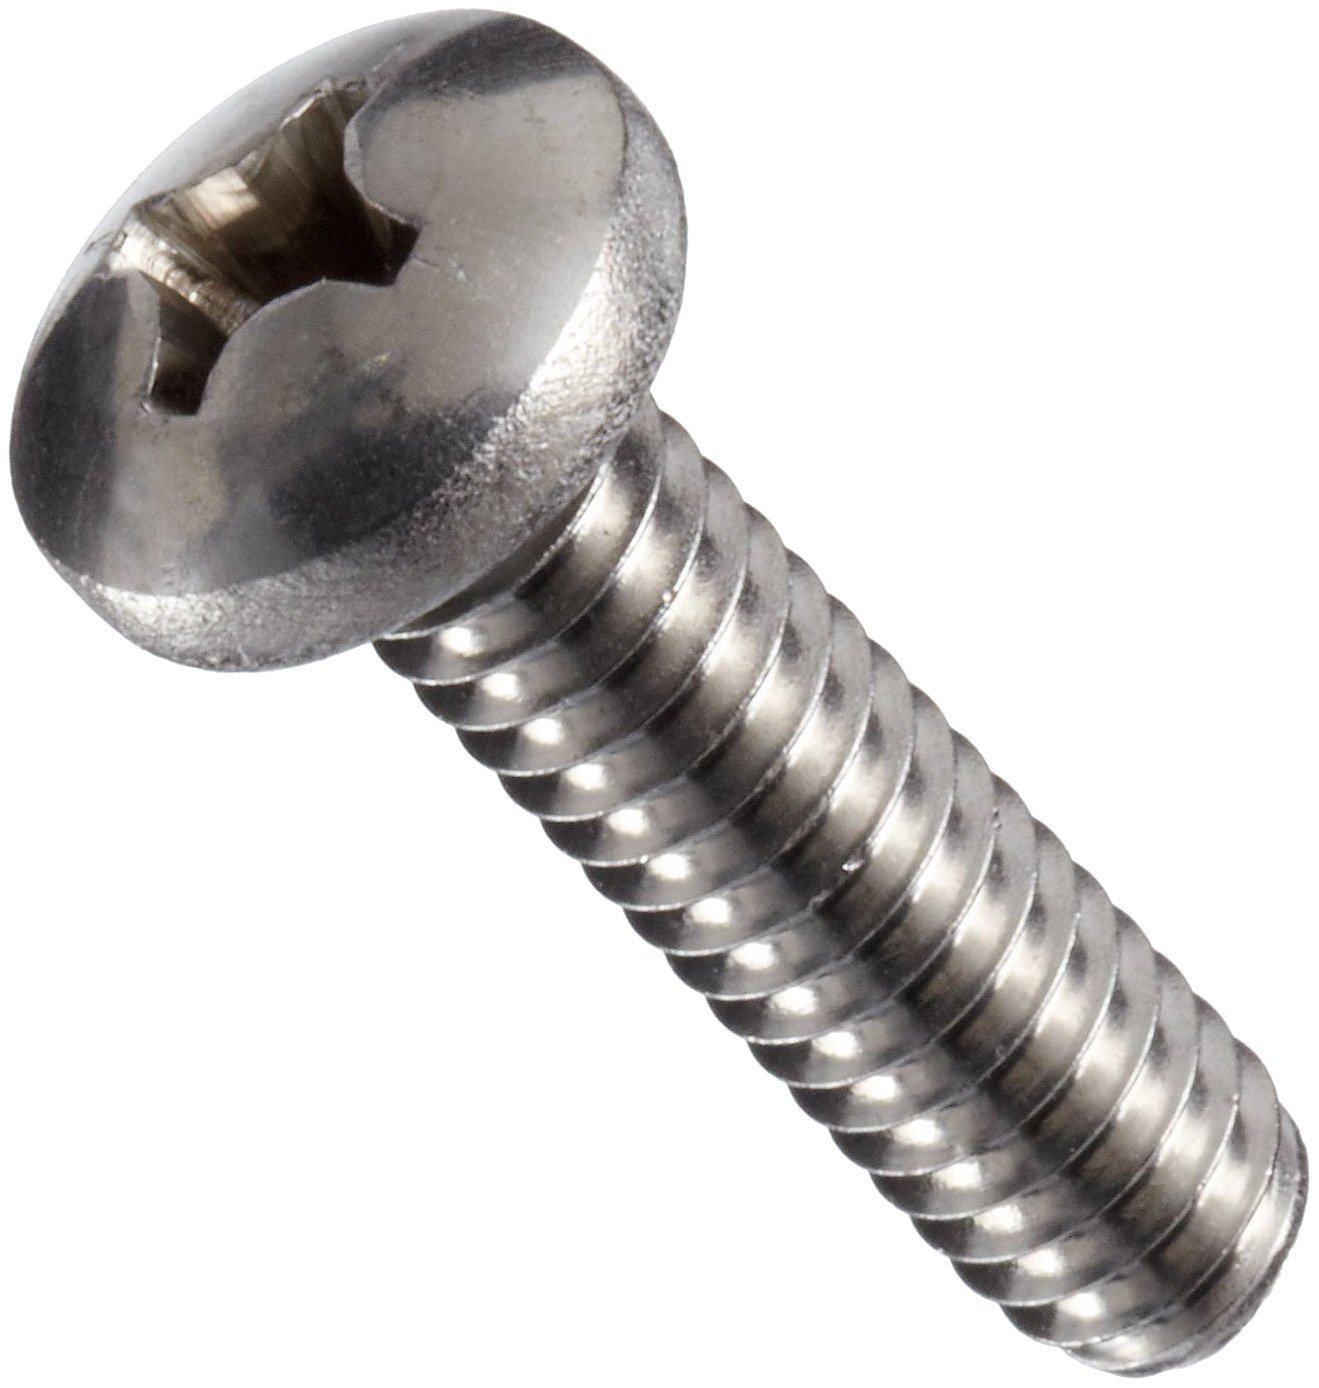 Phillips Drive Full Thread Stainless Steel 18-8 10-32 x 5/8 Pan Head Machine Screws Quantity 100 Pieces by Fastenere Machine Thread Bright Finish 